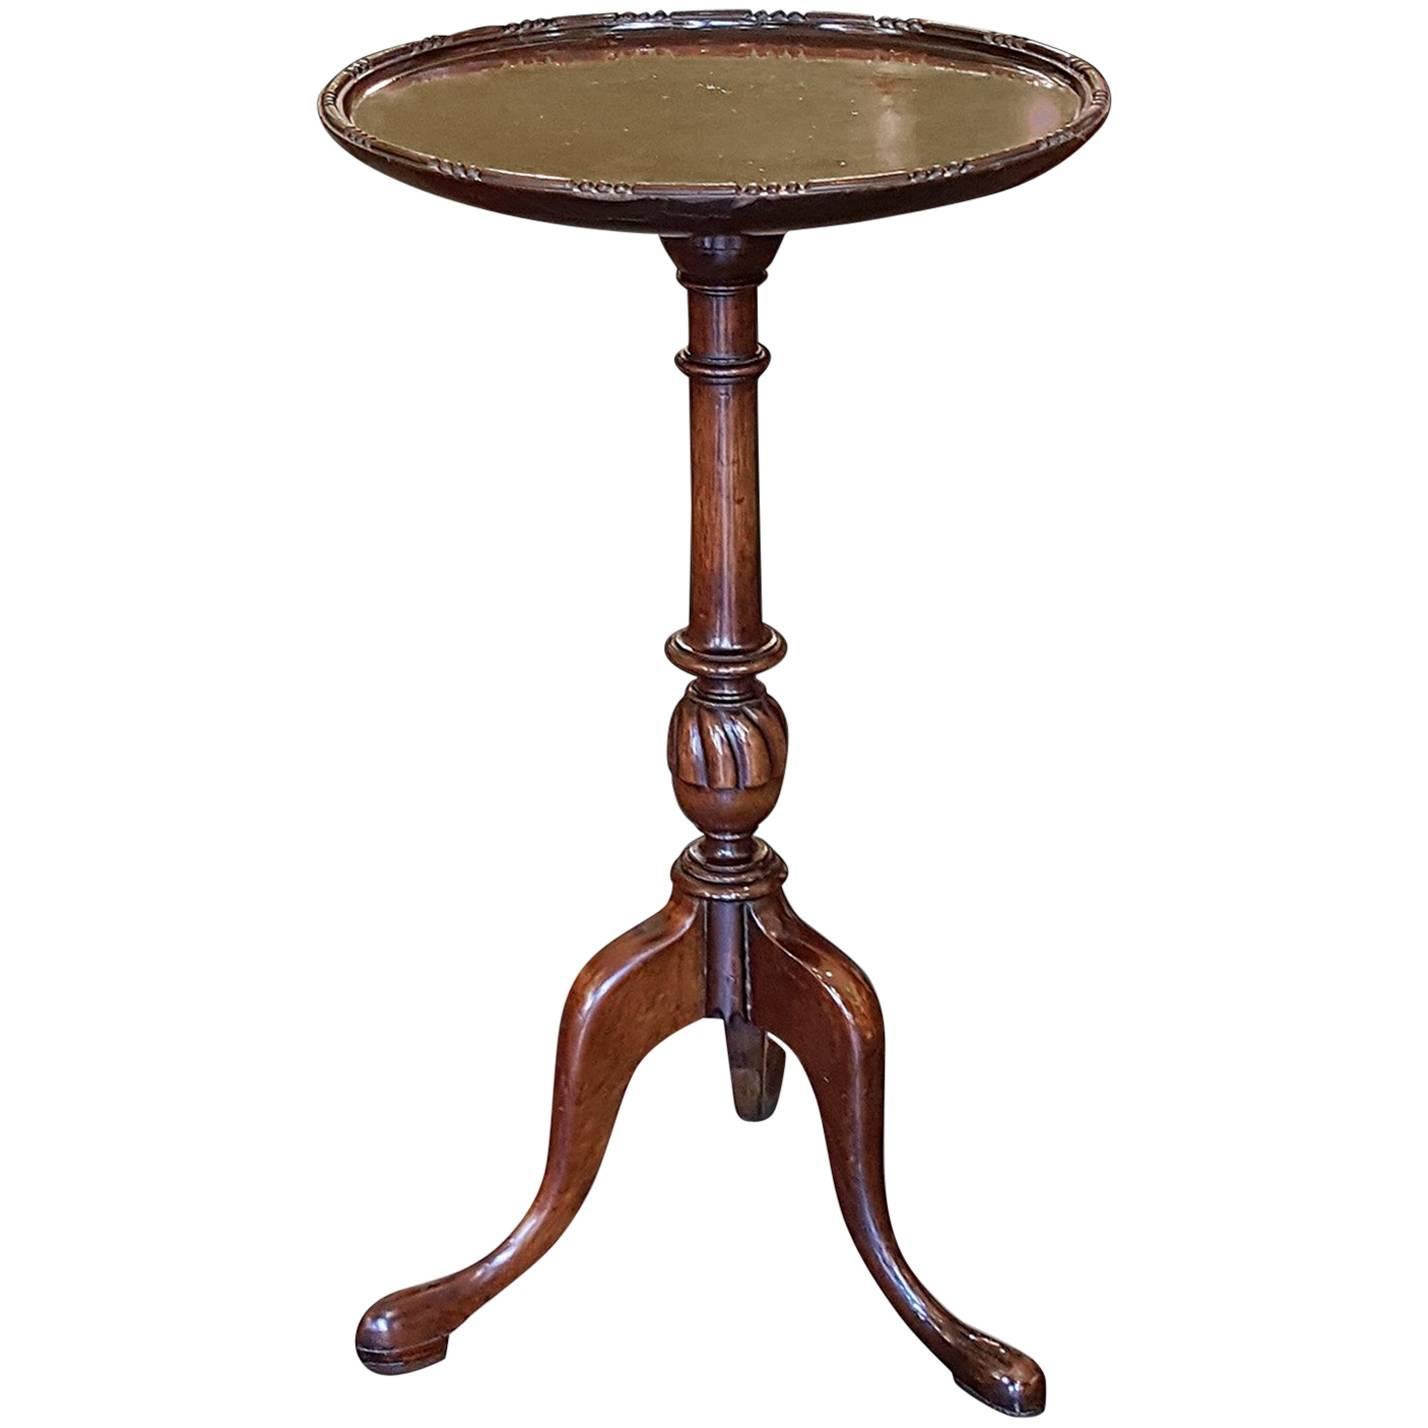 Late19th-Early 20th Century Mahogany Tripod Occasional Table